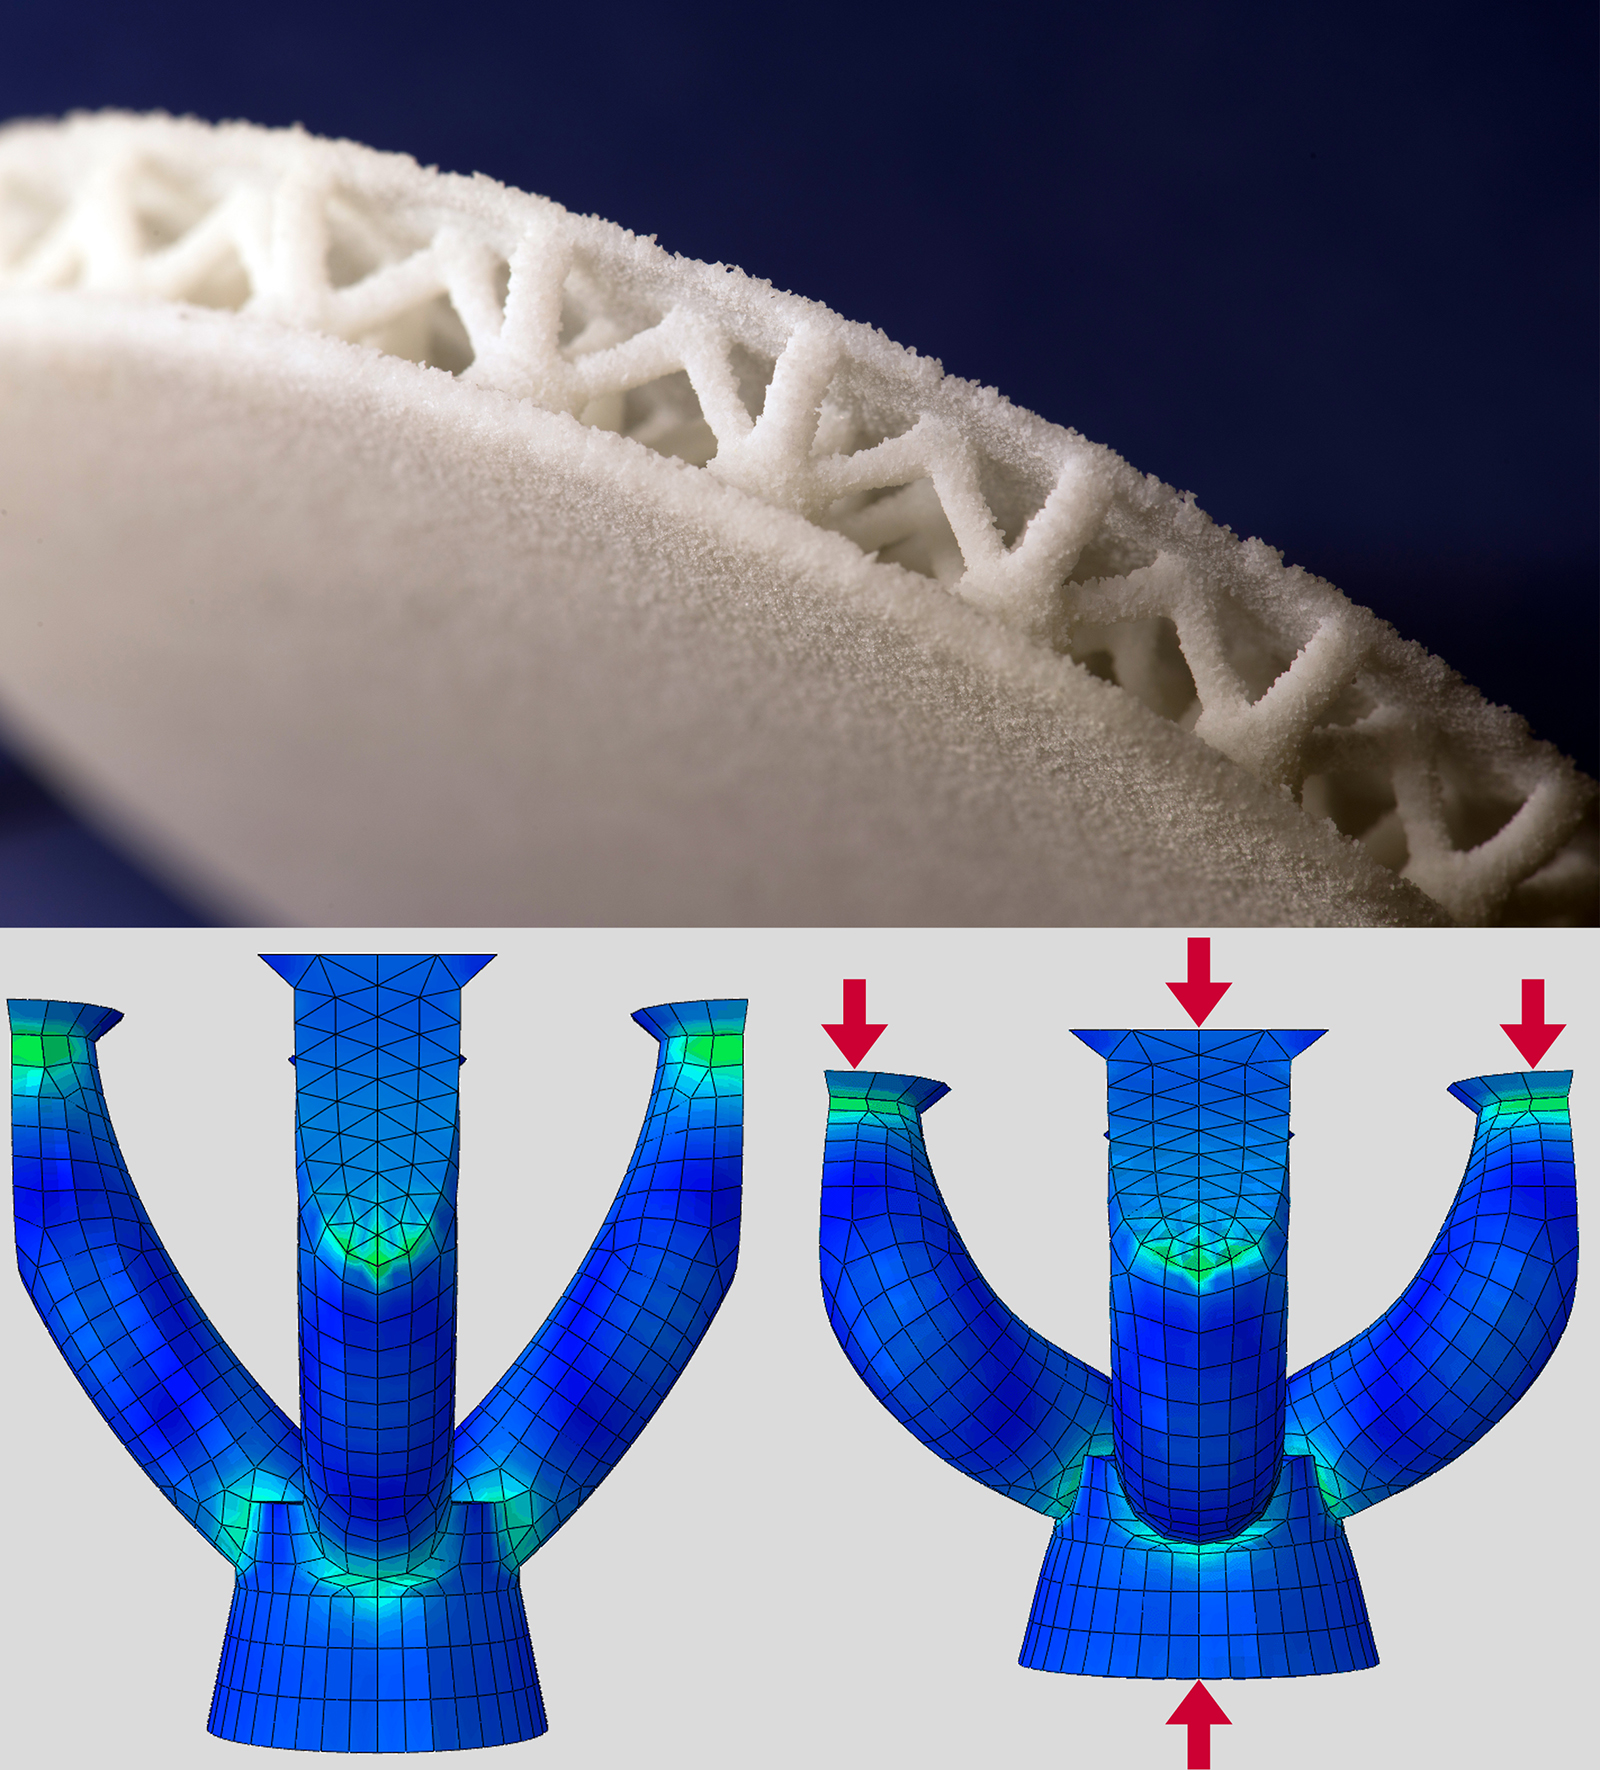 3D structures made of TPU for insoles. These structures were designed using CAD, and their properties were simulated and compared with experiments.